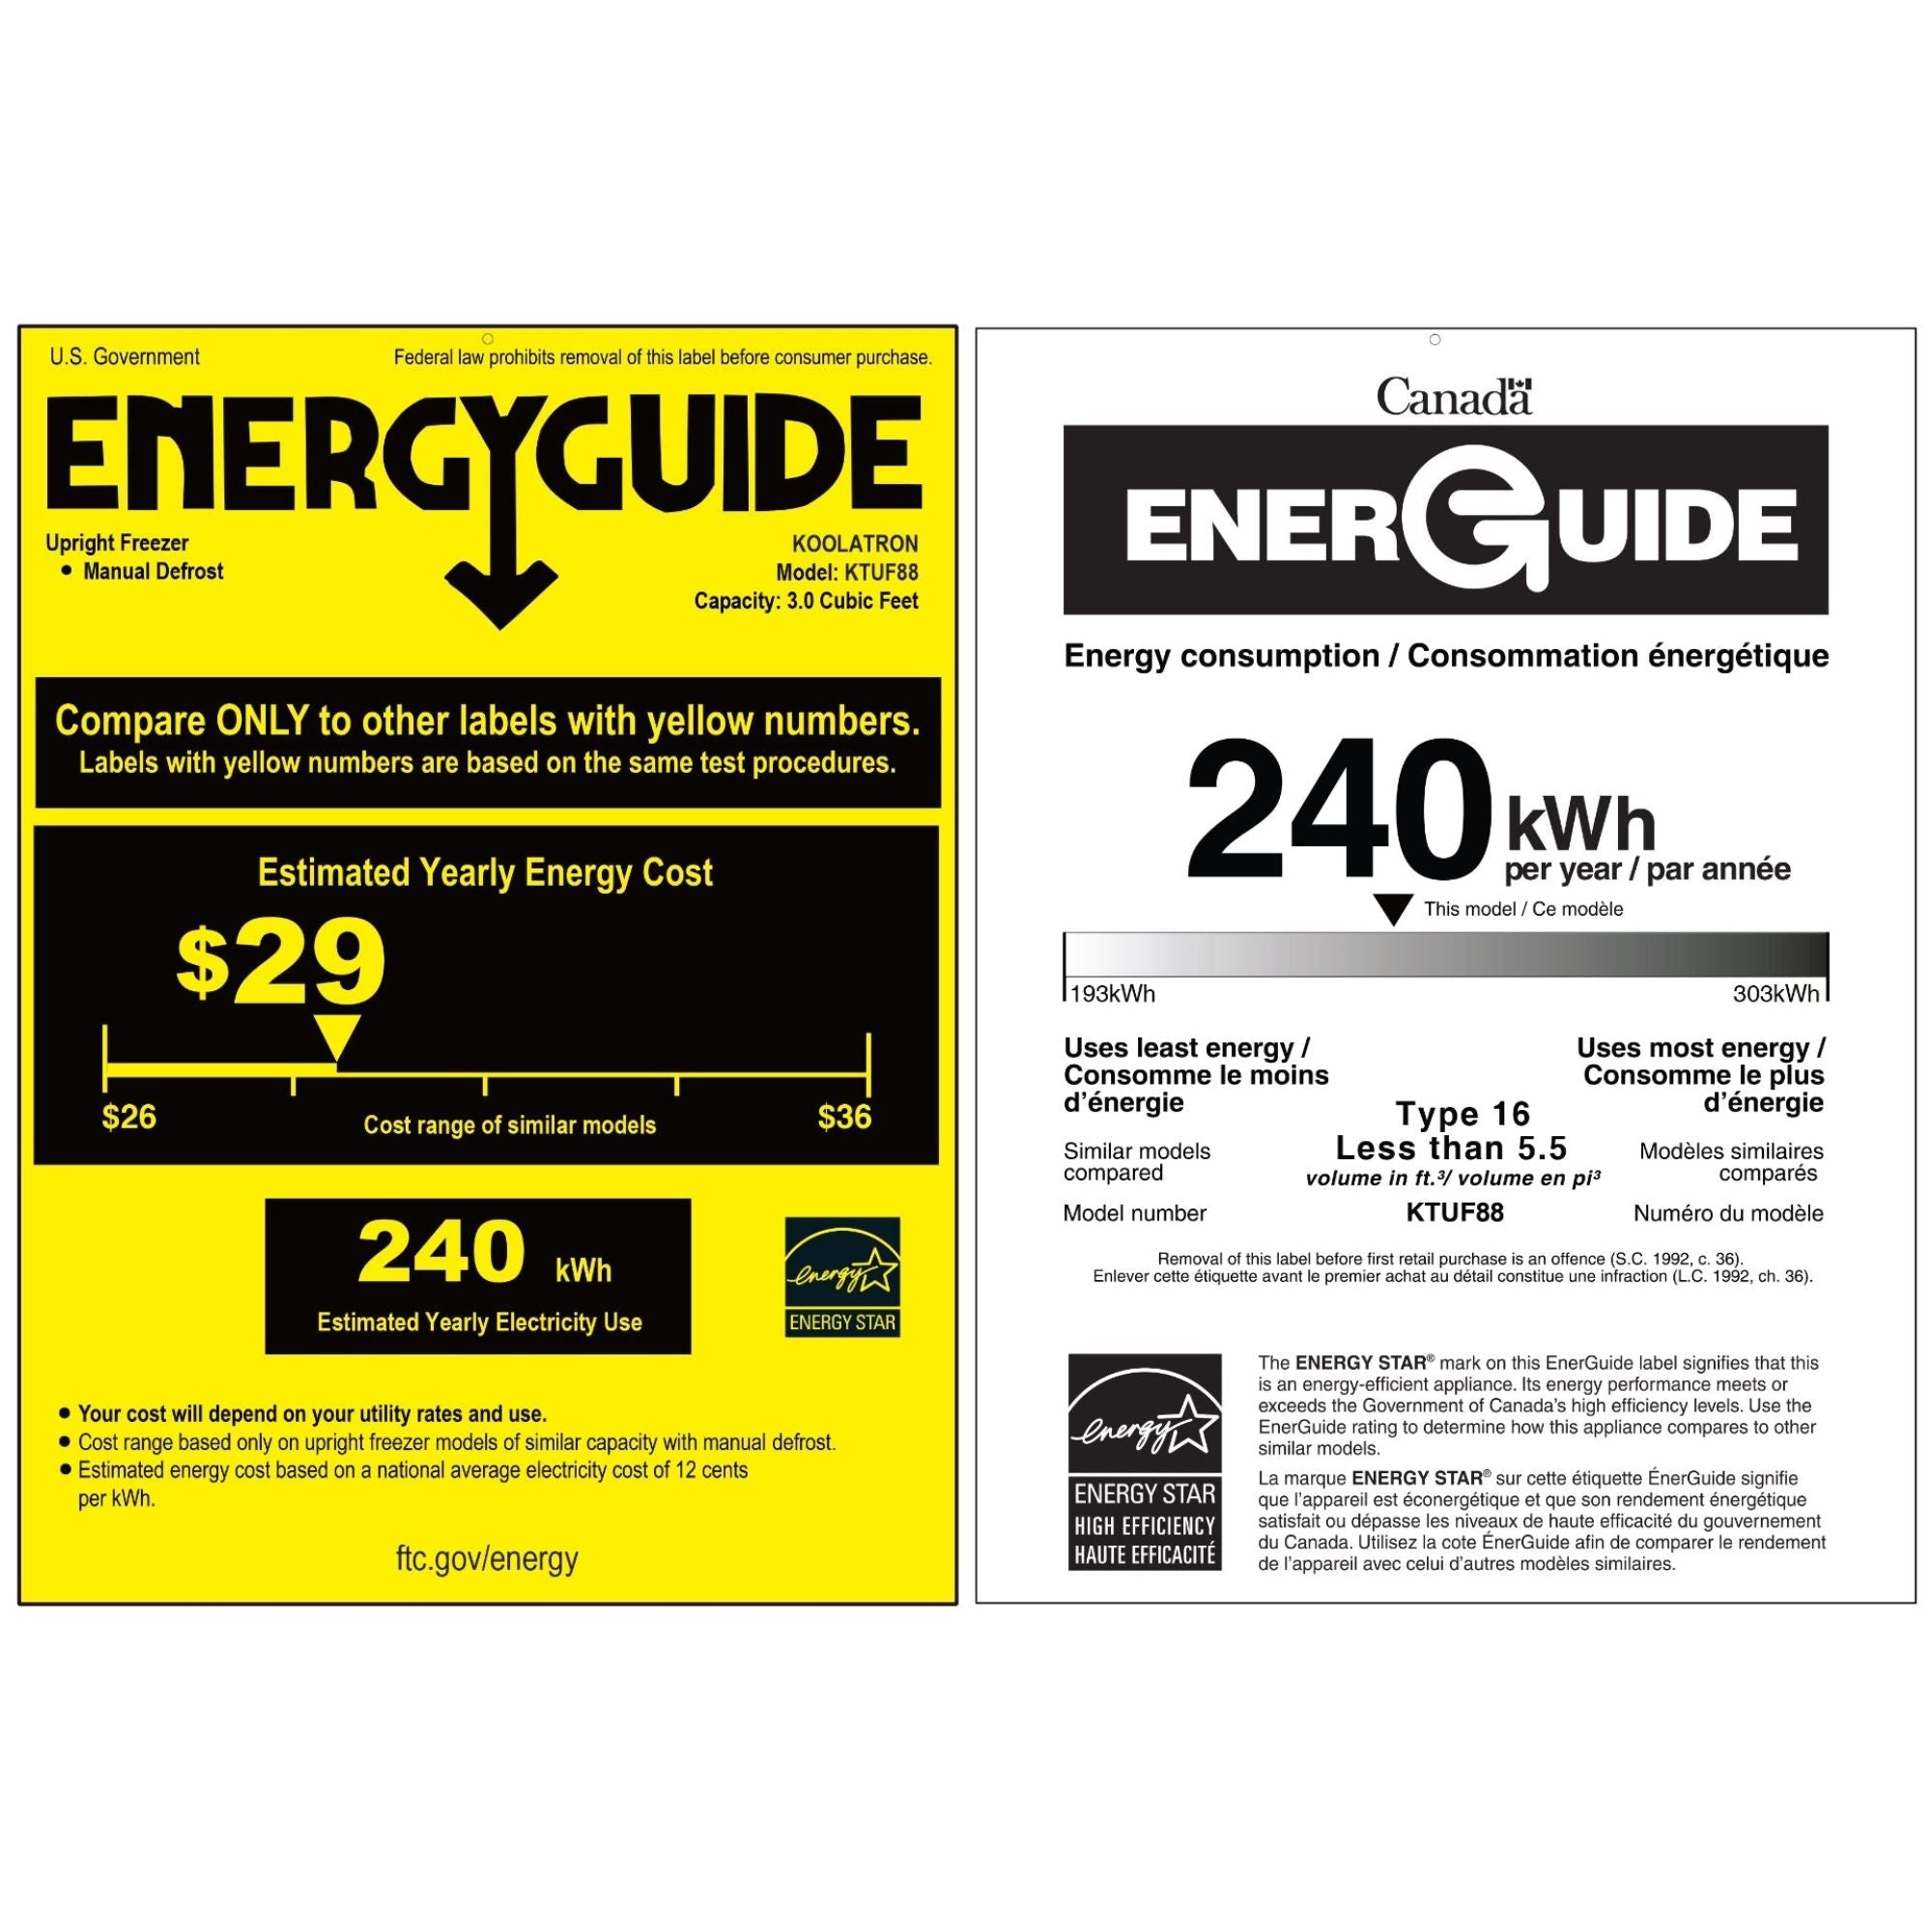 US and Canada Energy Guide certificates for KTUF88 3.1 cu ft upright freezer showing estimated yearly energy cost of $29 and estimated yearly energy consumption of 240 kWh